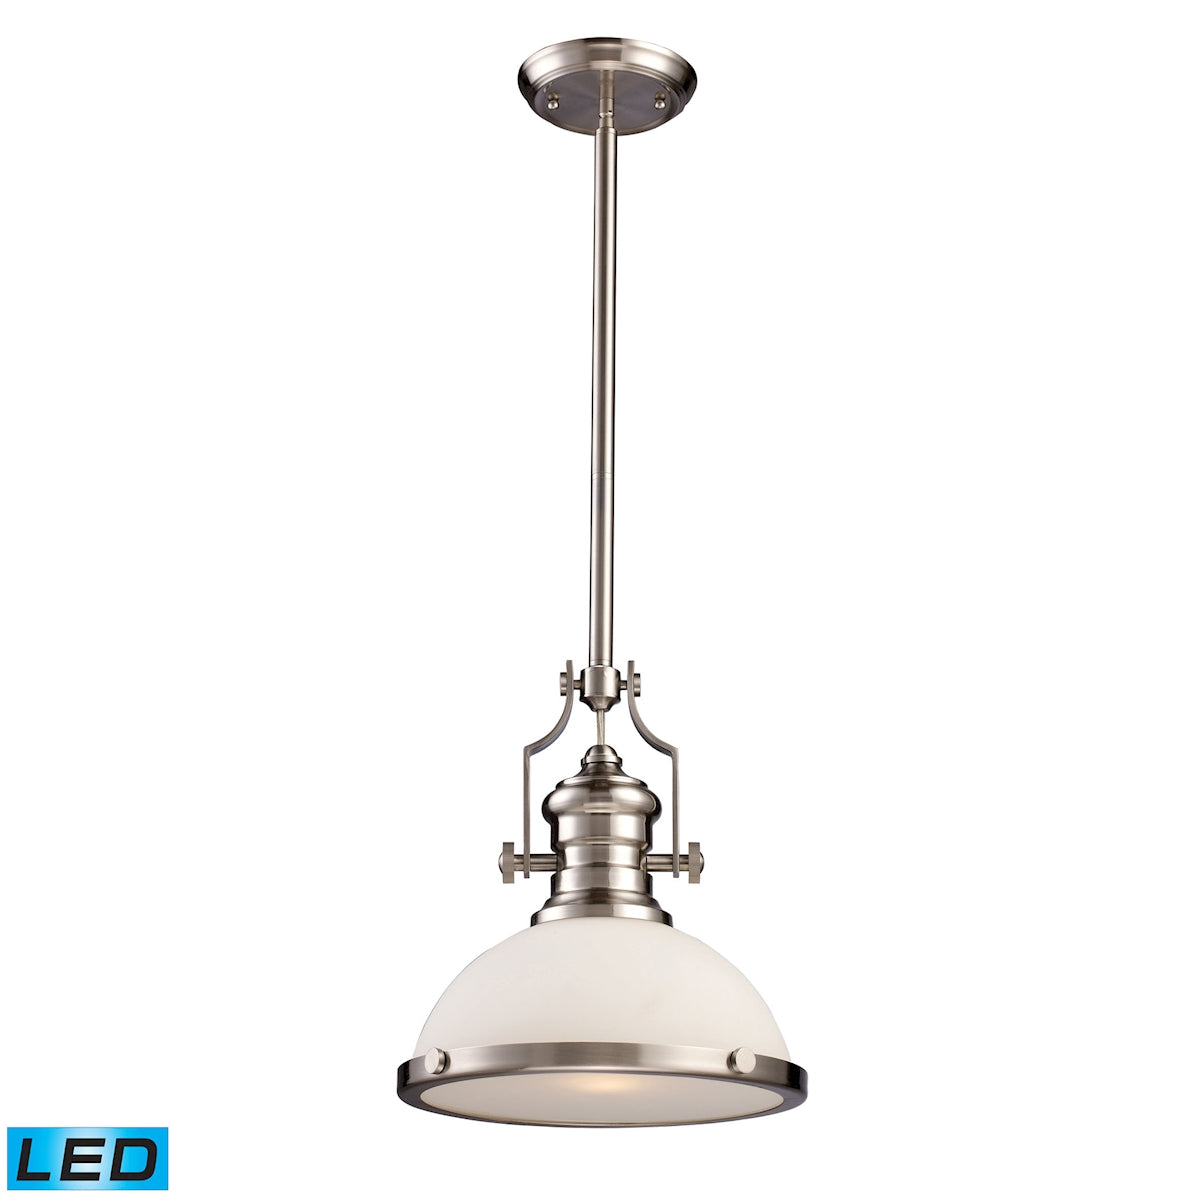 ELK Lighting 66123-1-LED Chadwick 1-Light Pendant in Satin Nickel with White Glass - Includes LED Bulb